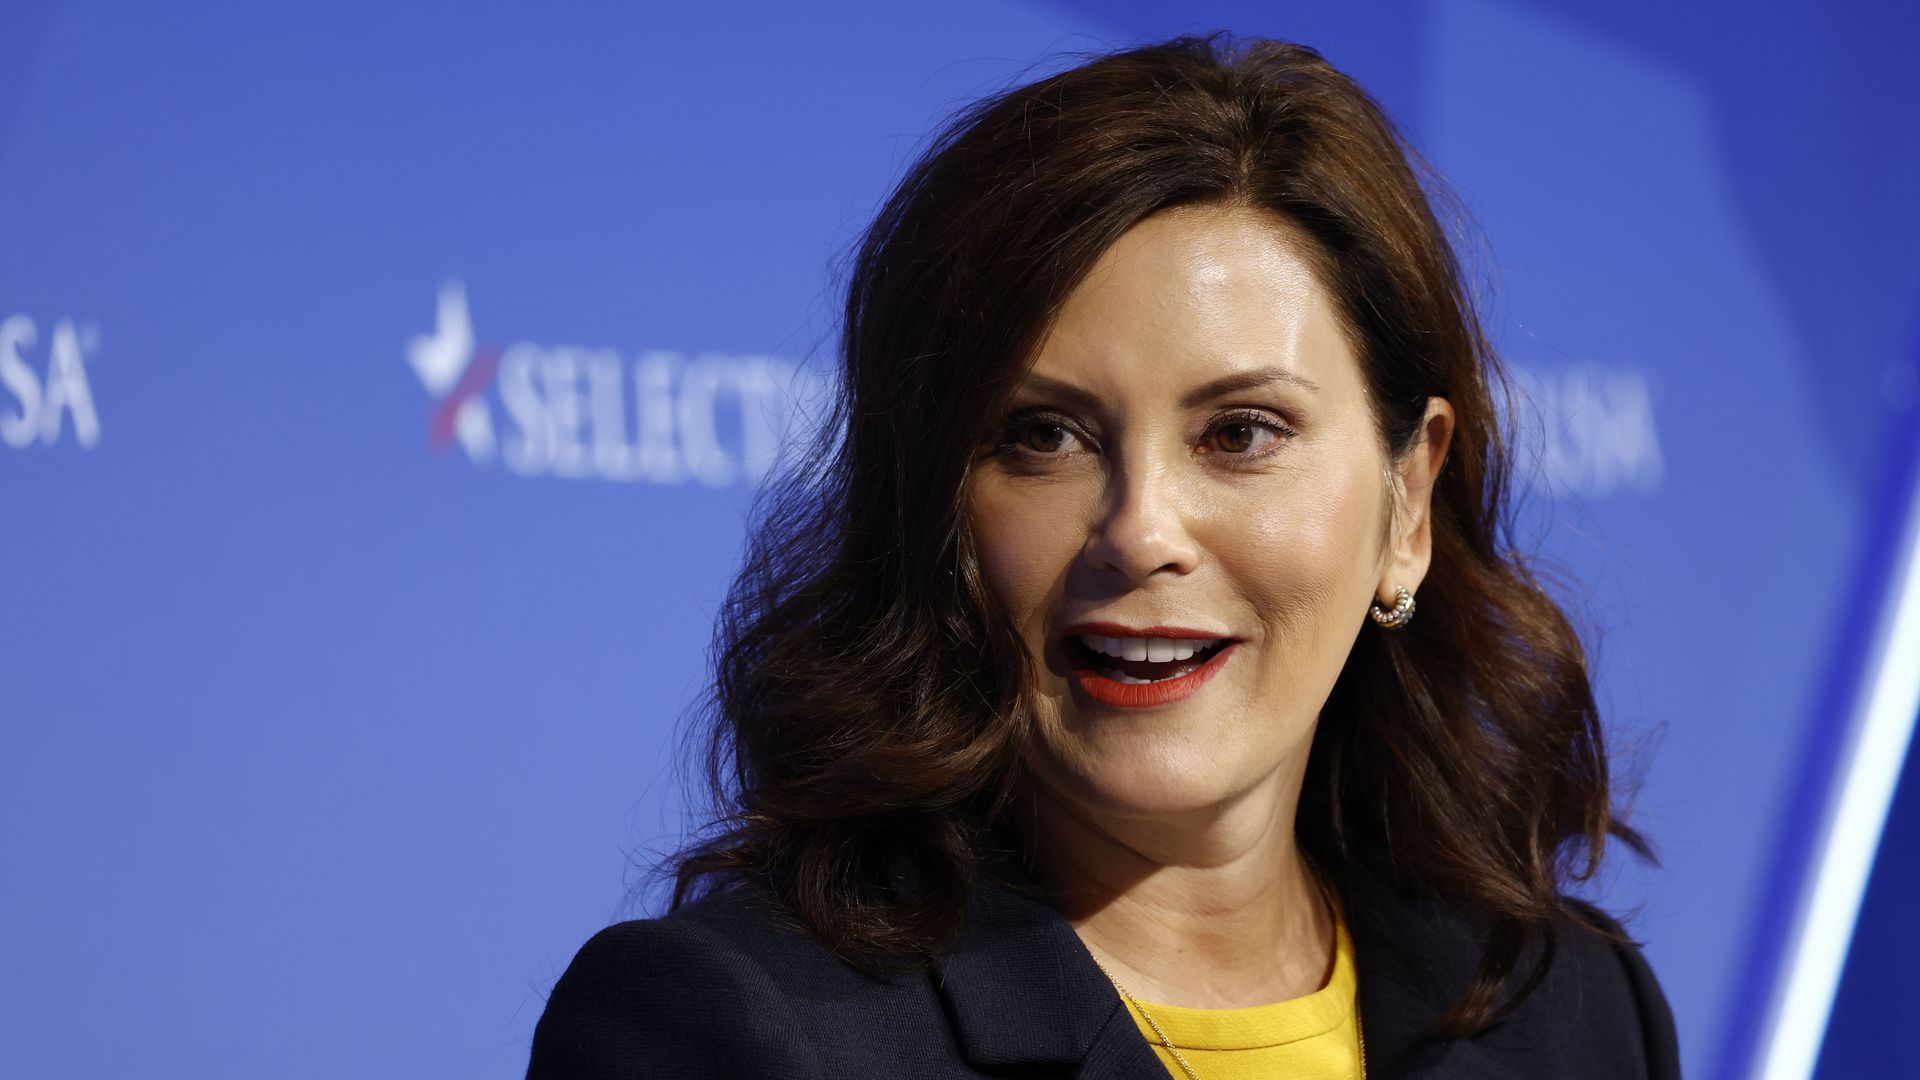 retchen Whitmer, governor of Michigan, speaks on a panel during the SelectUSA Investment Summit in National Harbor, Maryland, US, on Monday, June 27, 2022